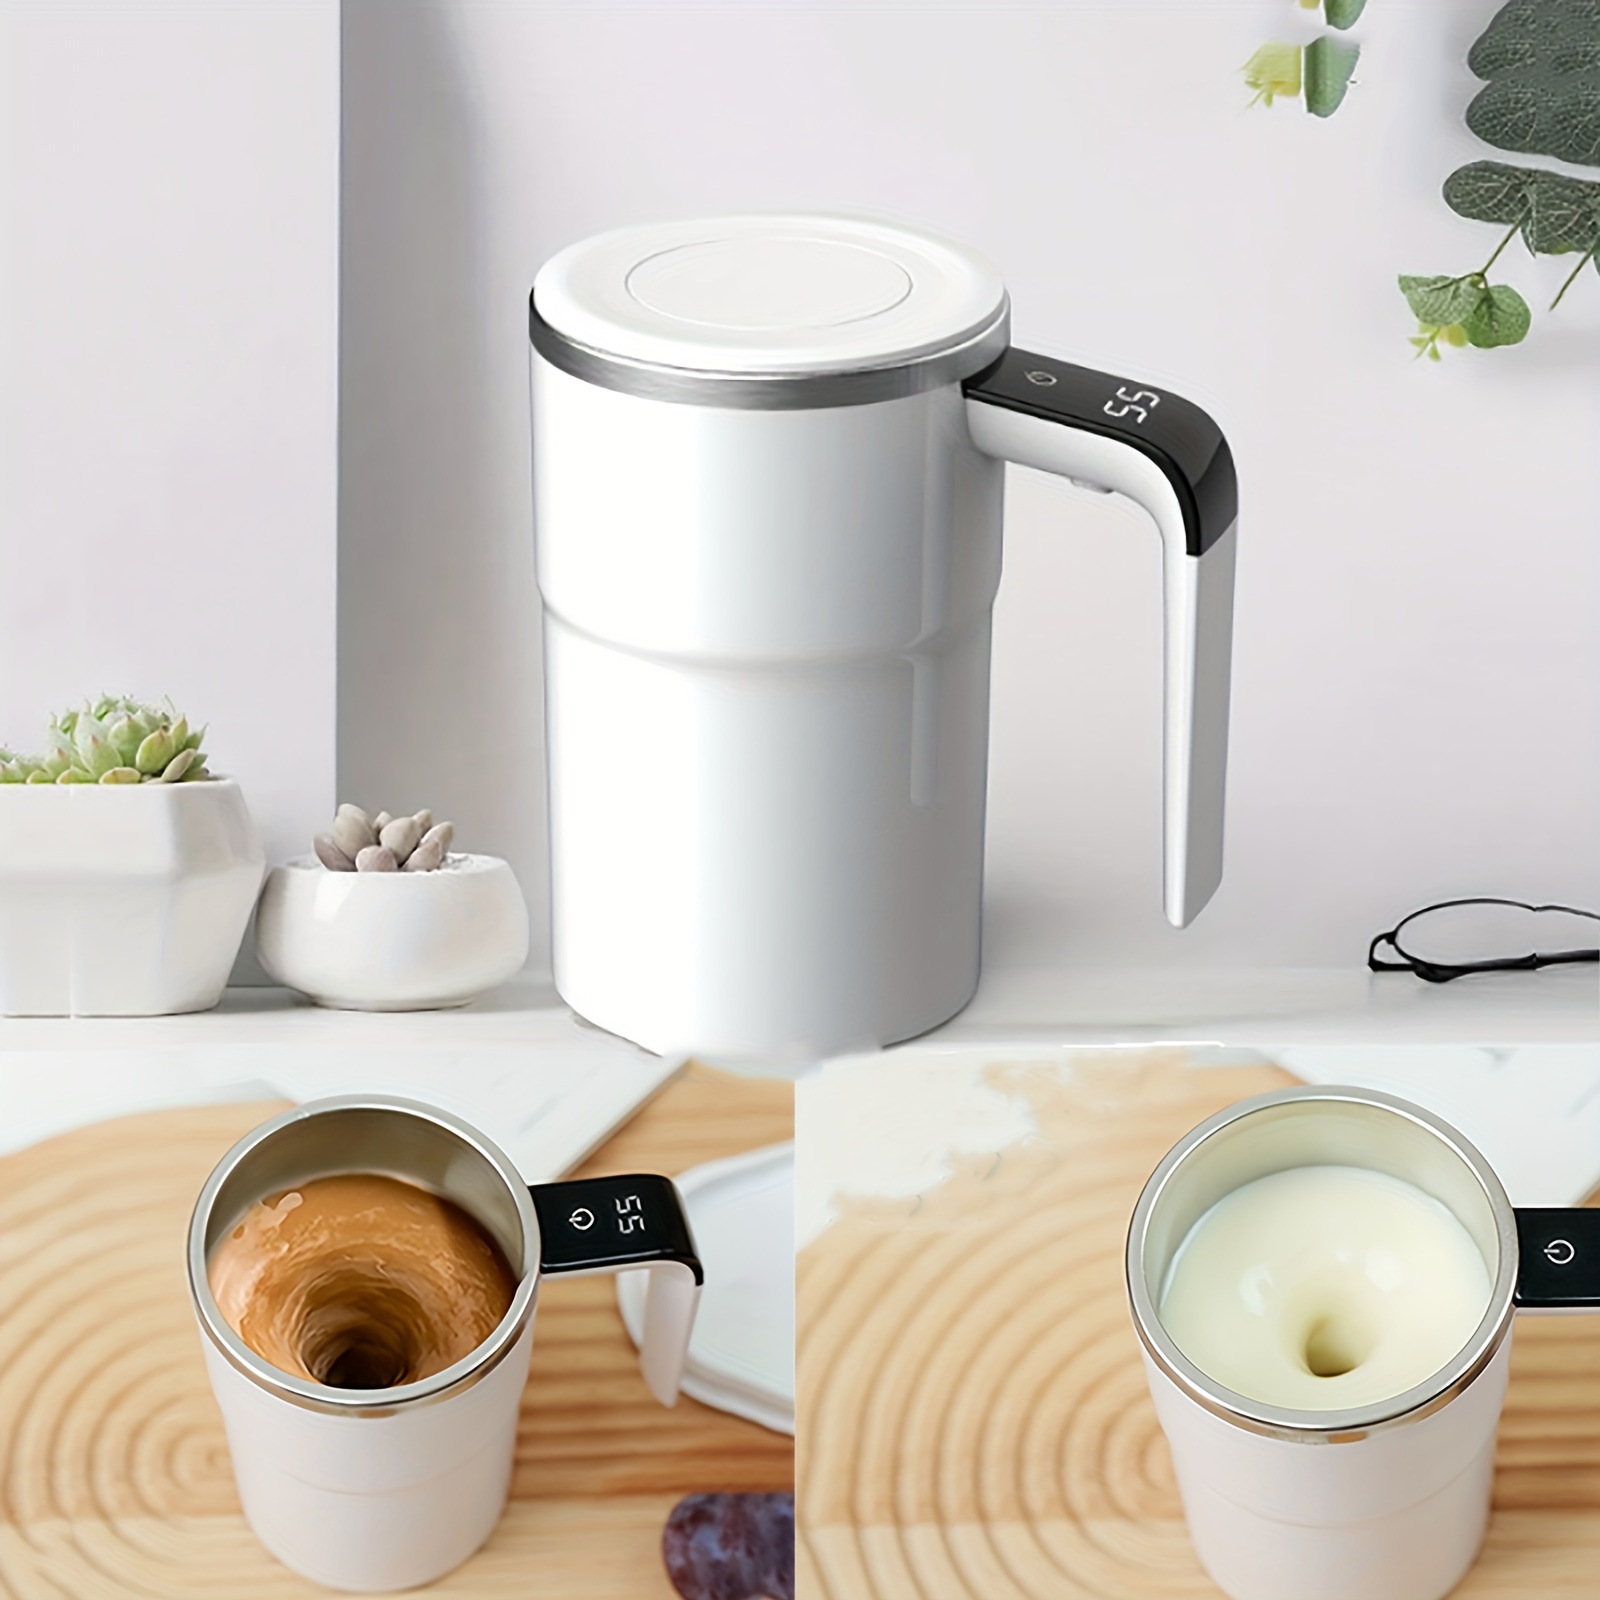 Self Stirring Mug Stainless Steel Lazy Automatic Coffee Tea Milk Mixing Cup  Gift